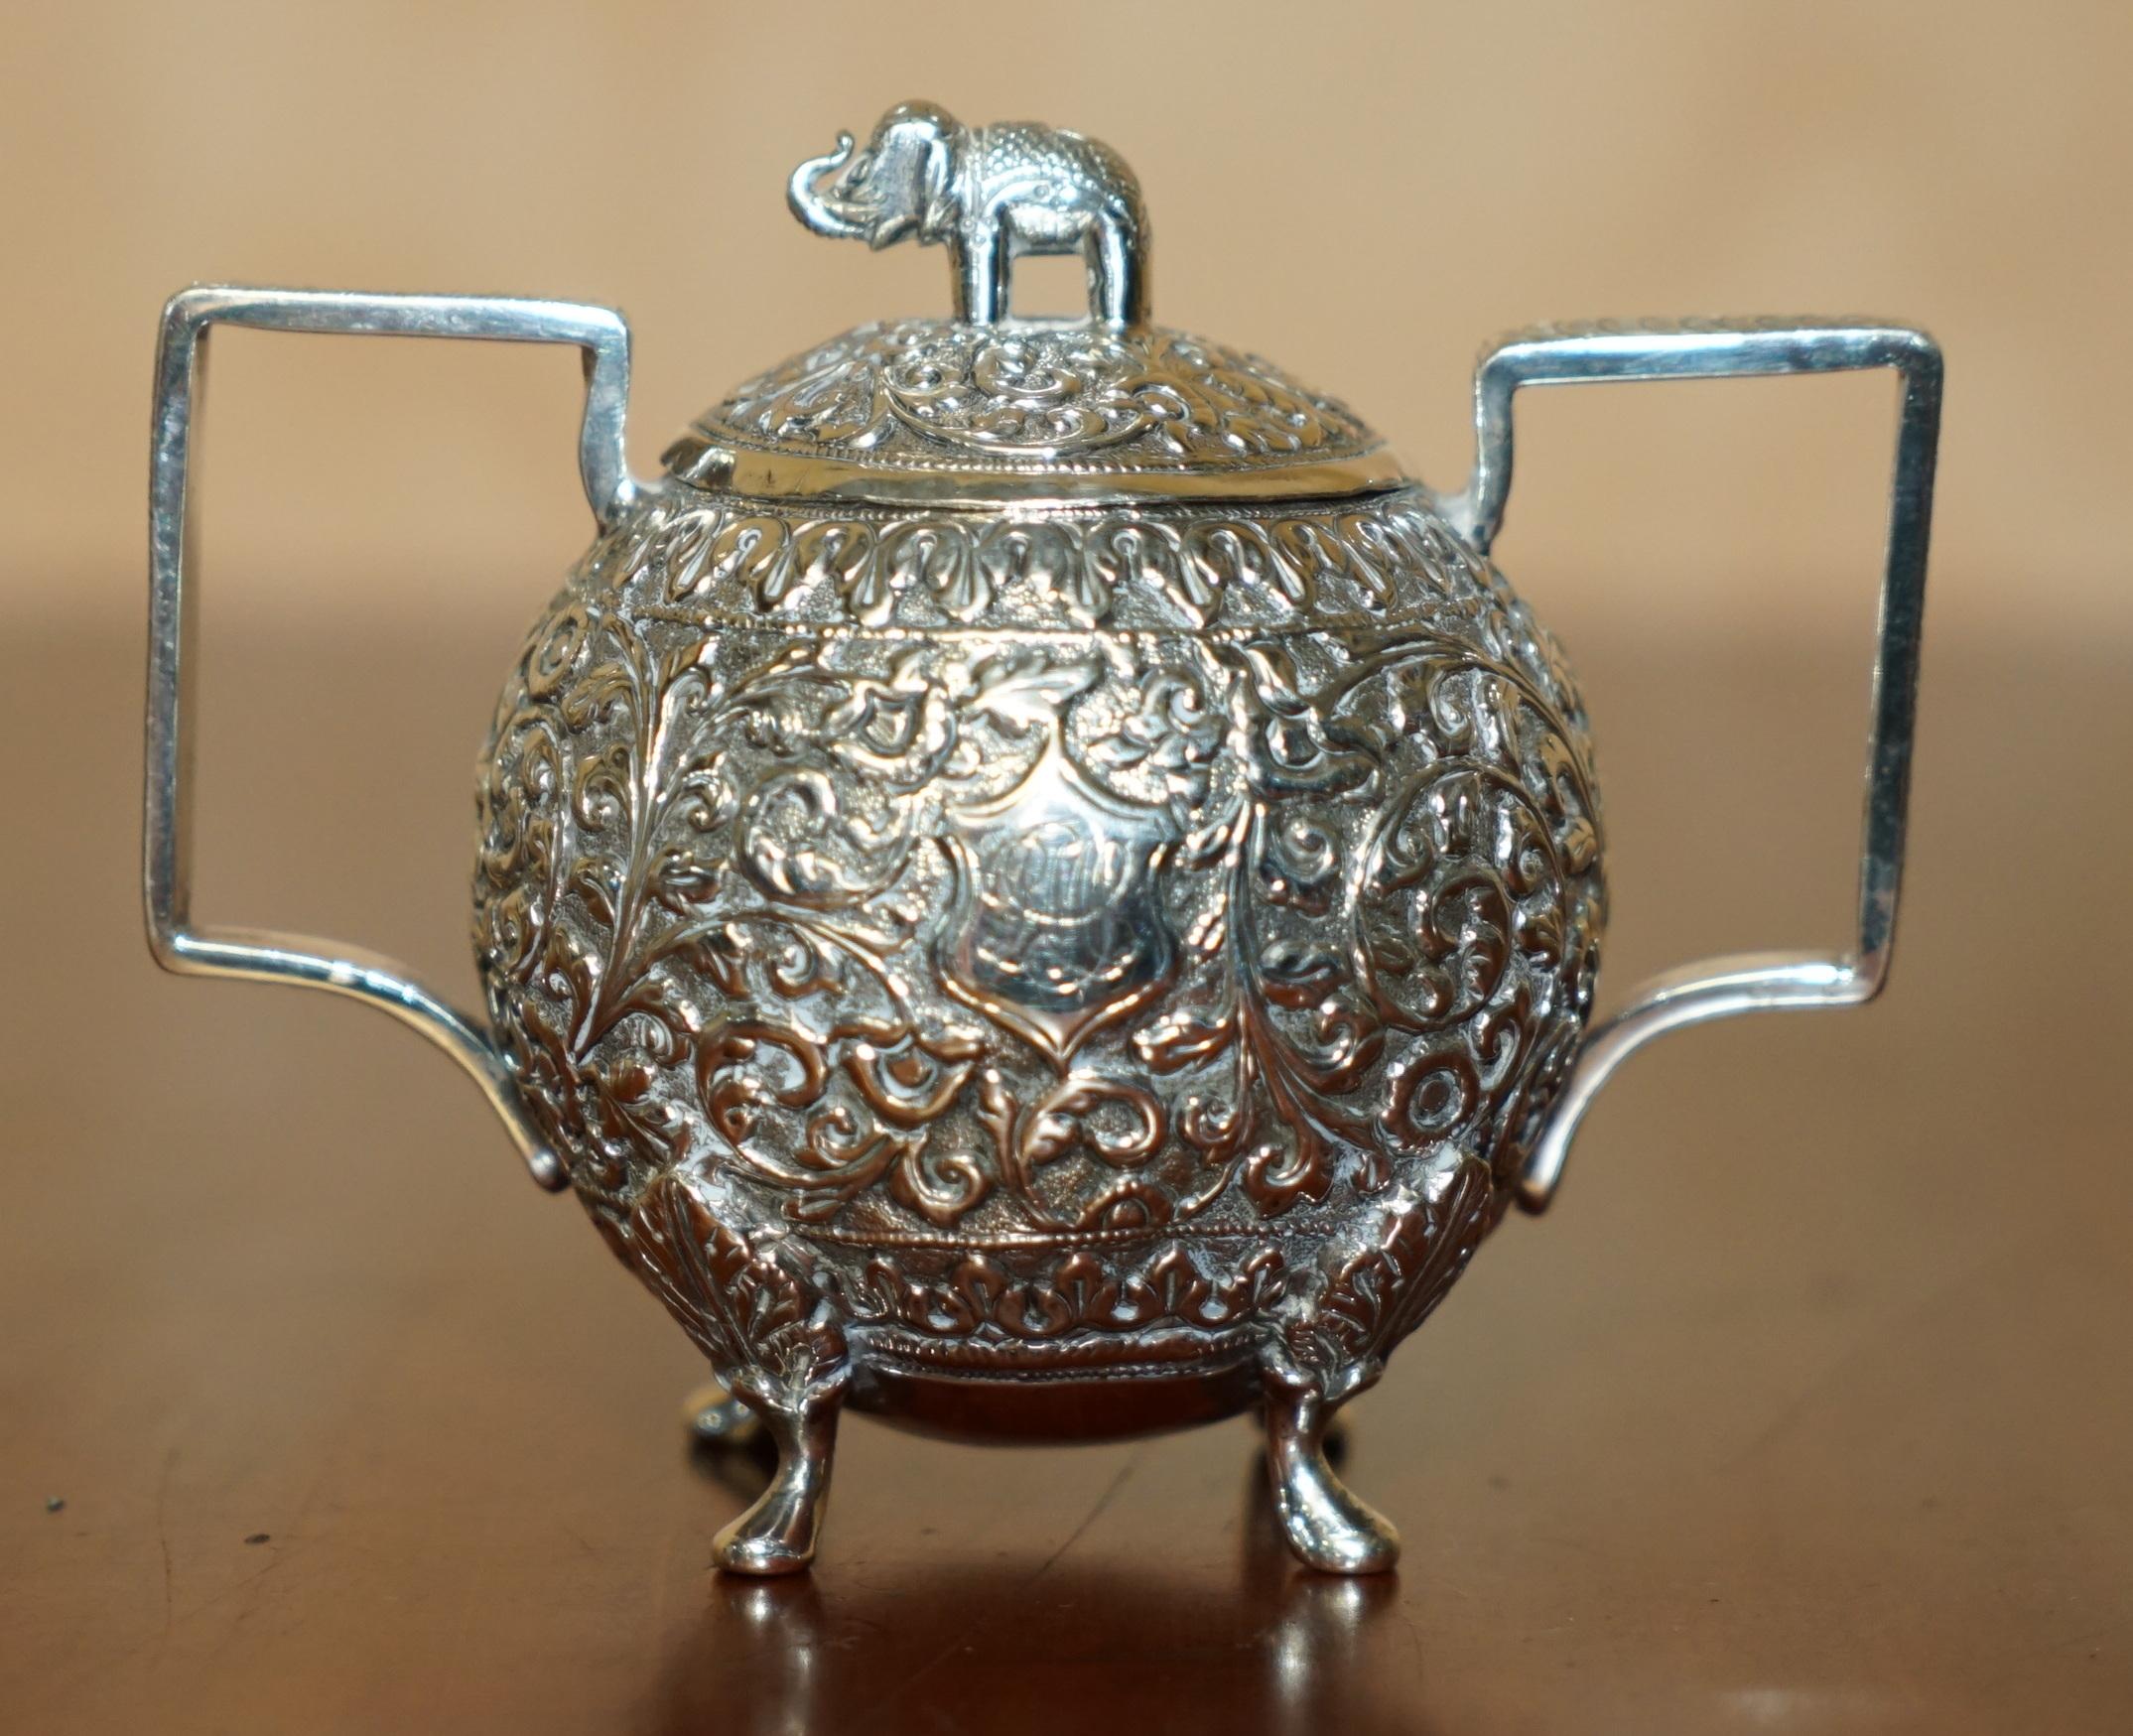 ANTIQUE INDIAN ELEPHANT COLONIAL SOLiD SILBER TEA SERVICE OOMERSI MAWJI & SONS im Angebot 4